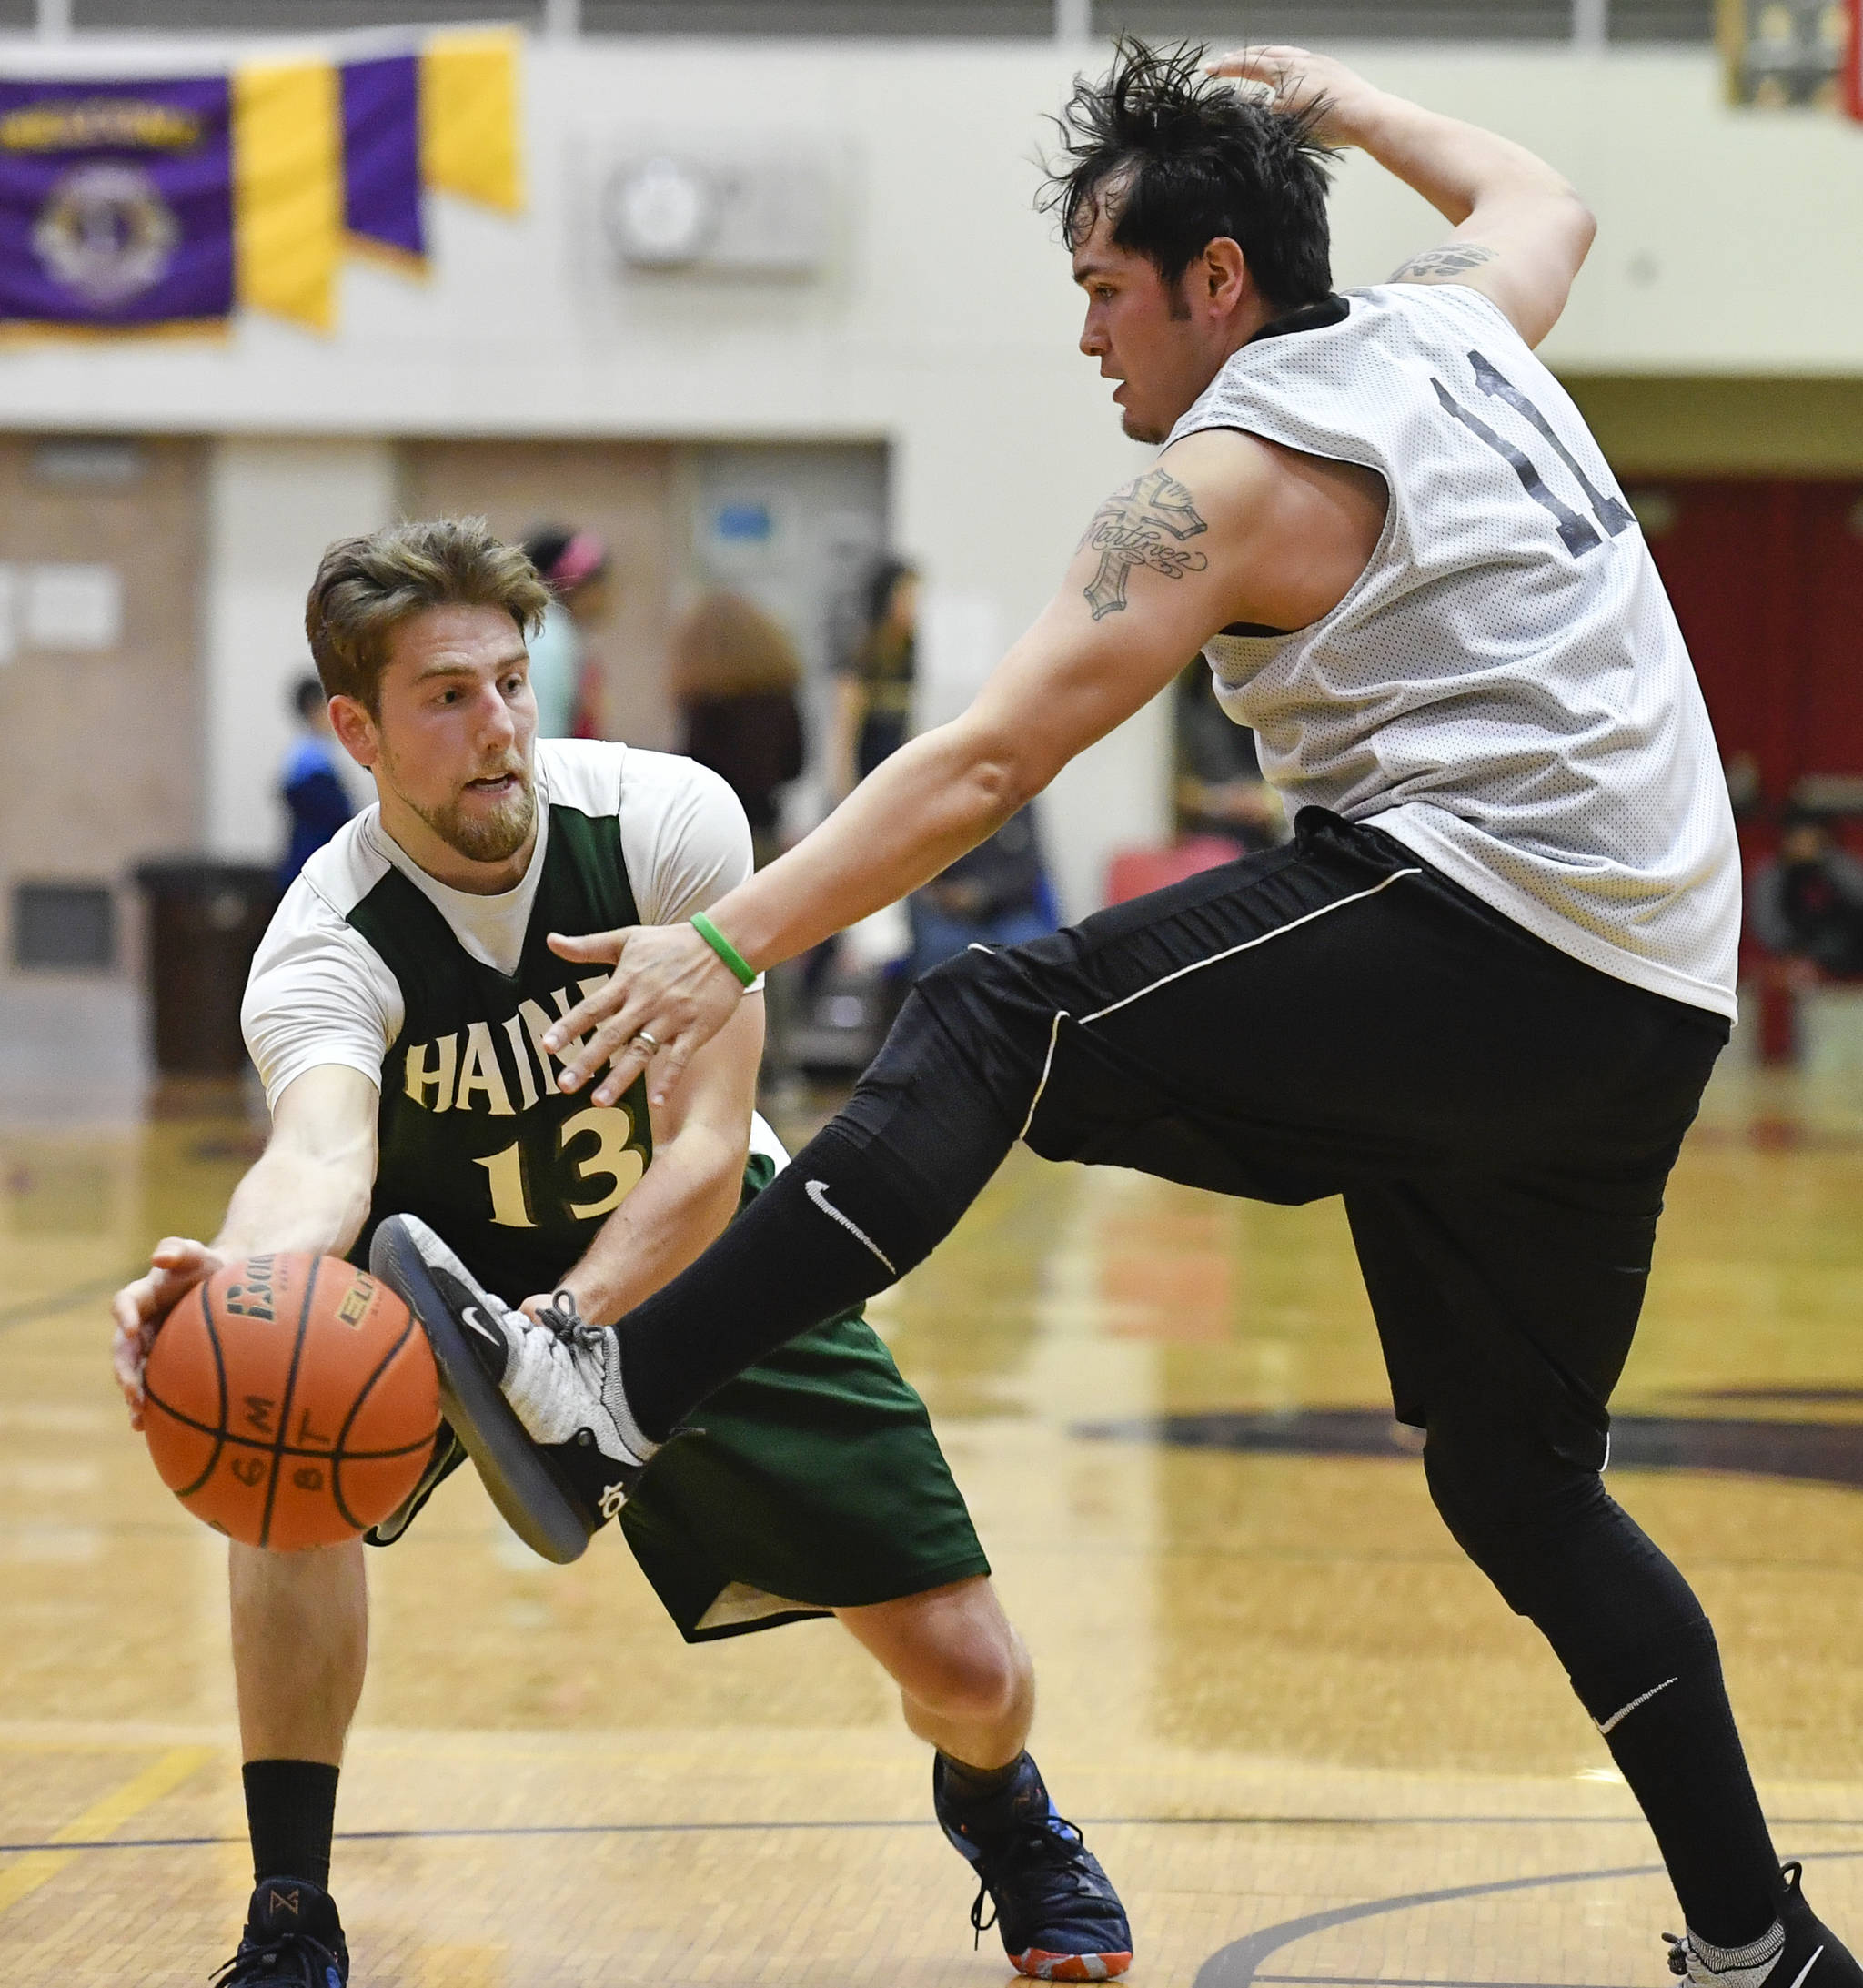 Metlakatla’s Shane Martinez, right, gets a foot on the ball against Haines’ Orion Farley during their B bracket game at the Juneau Lions Club 73rd Annual Gold Medal Basketball Tournament at Juneau-Douglas High School on Friday, March 22, 2019. (Michael Penn | Juneau Empire)